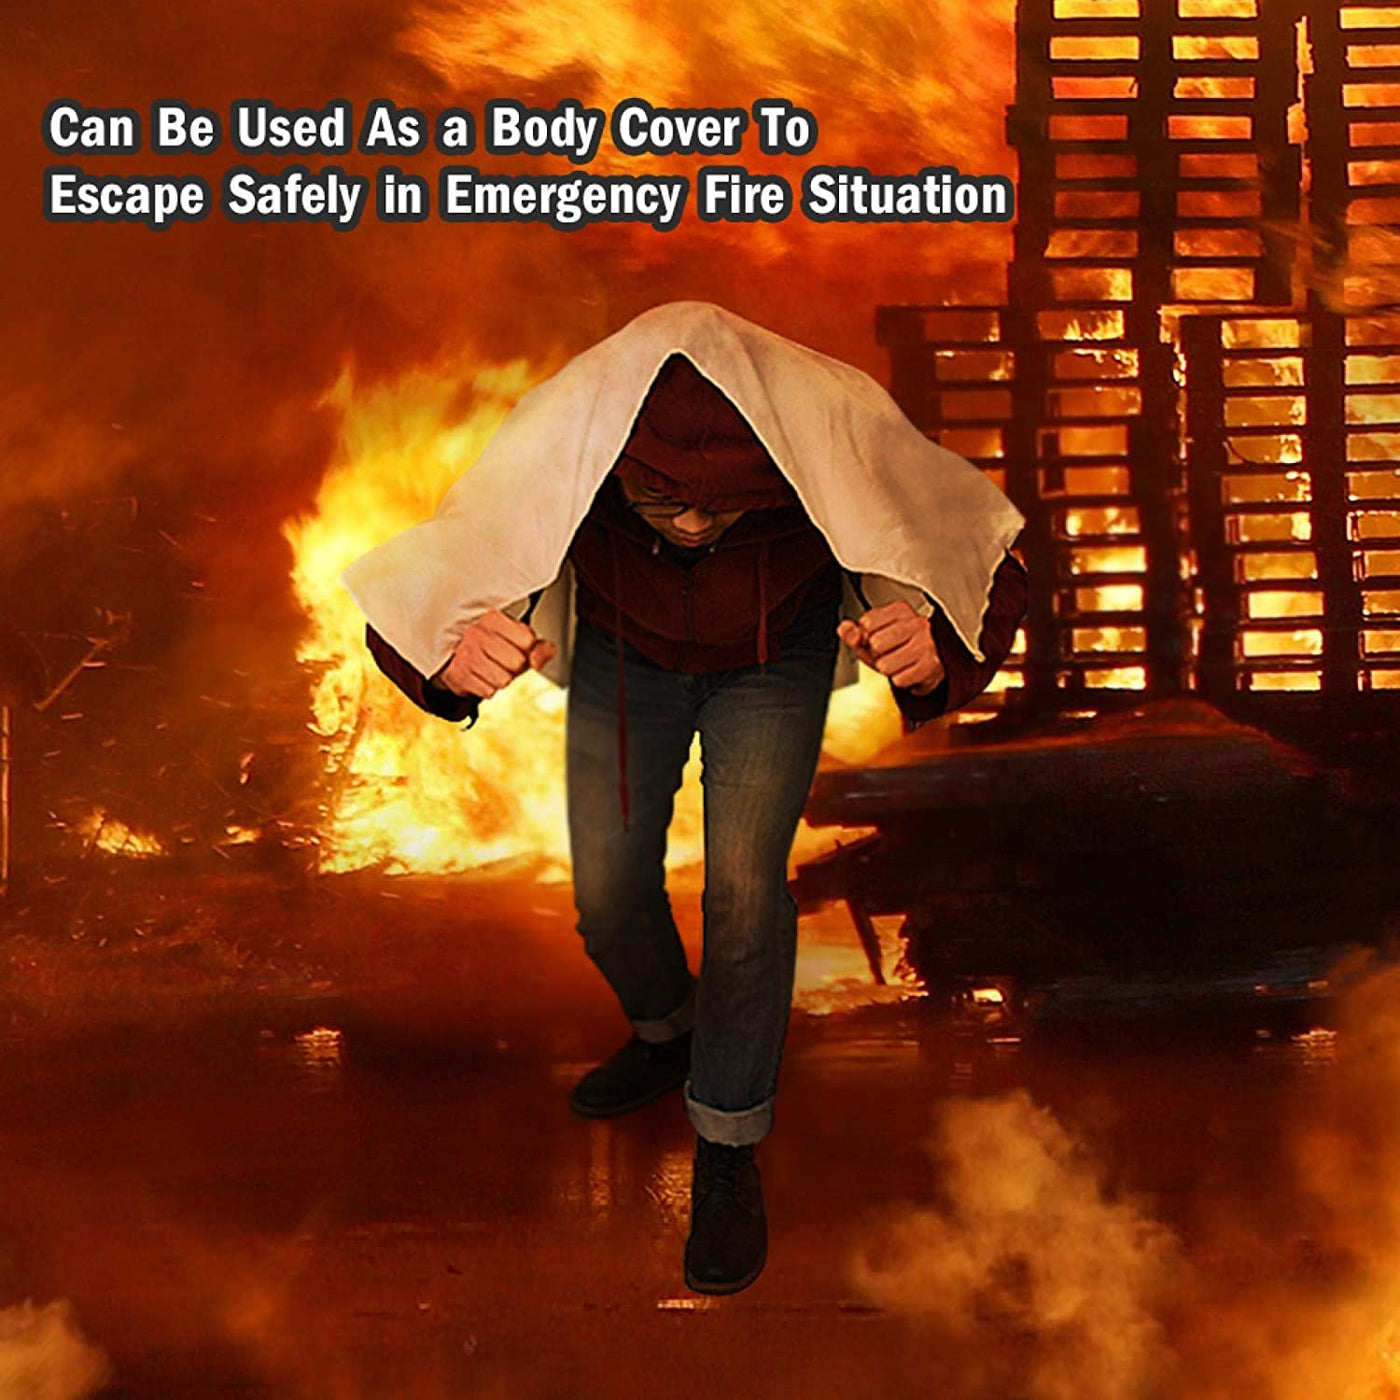 Top 5 Fire Blankets  Don't Get Caught Unprepared and Escape The Danger! 